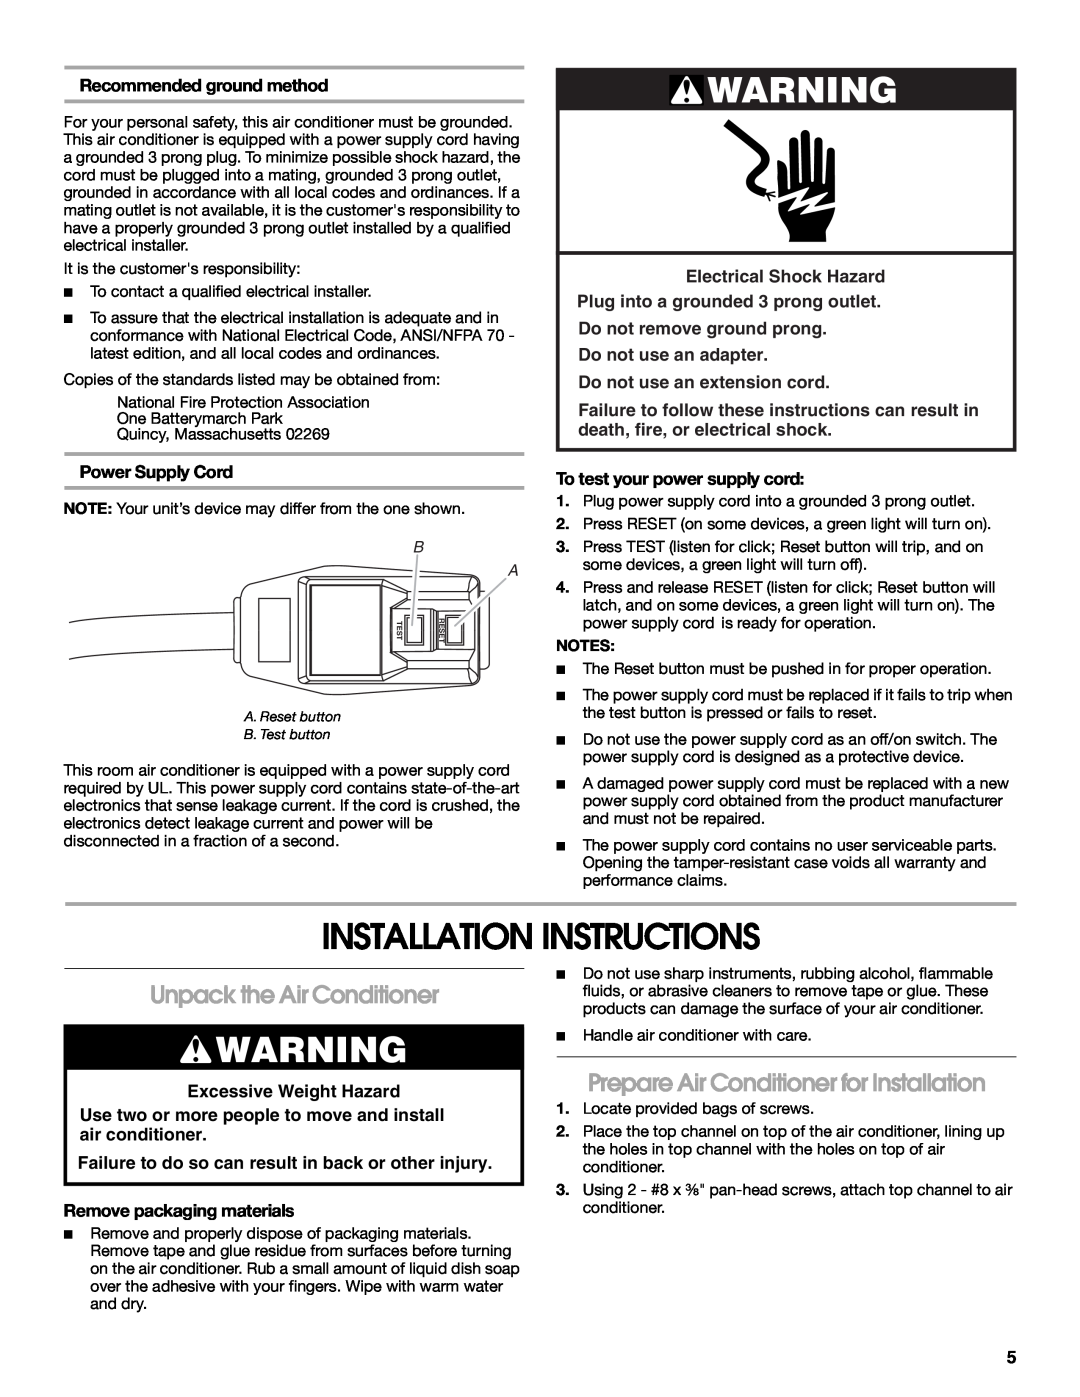 Whirlpool ACM052PS0 manual Installation Instructions, Unpack the Air Conditioner, Prepare Air Conditioner for Installation 